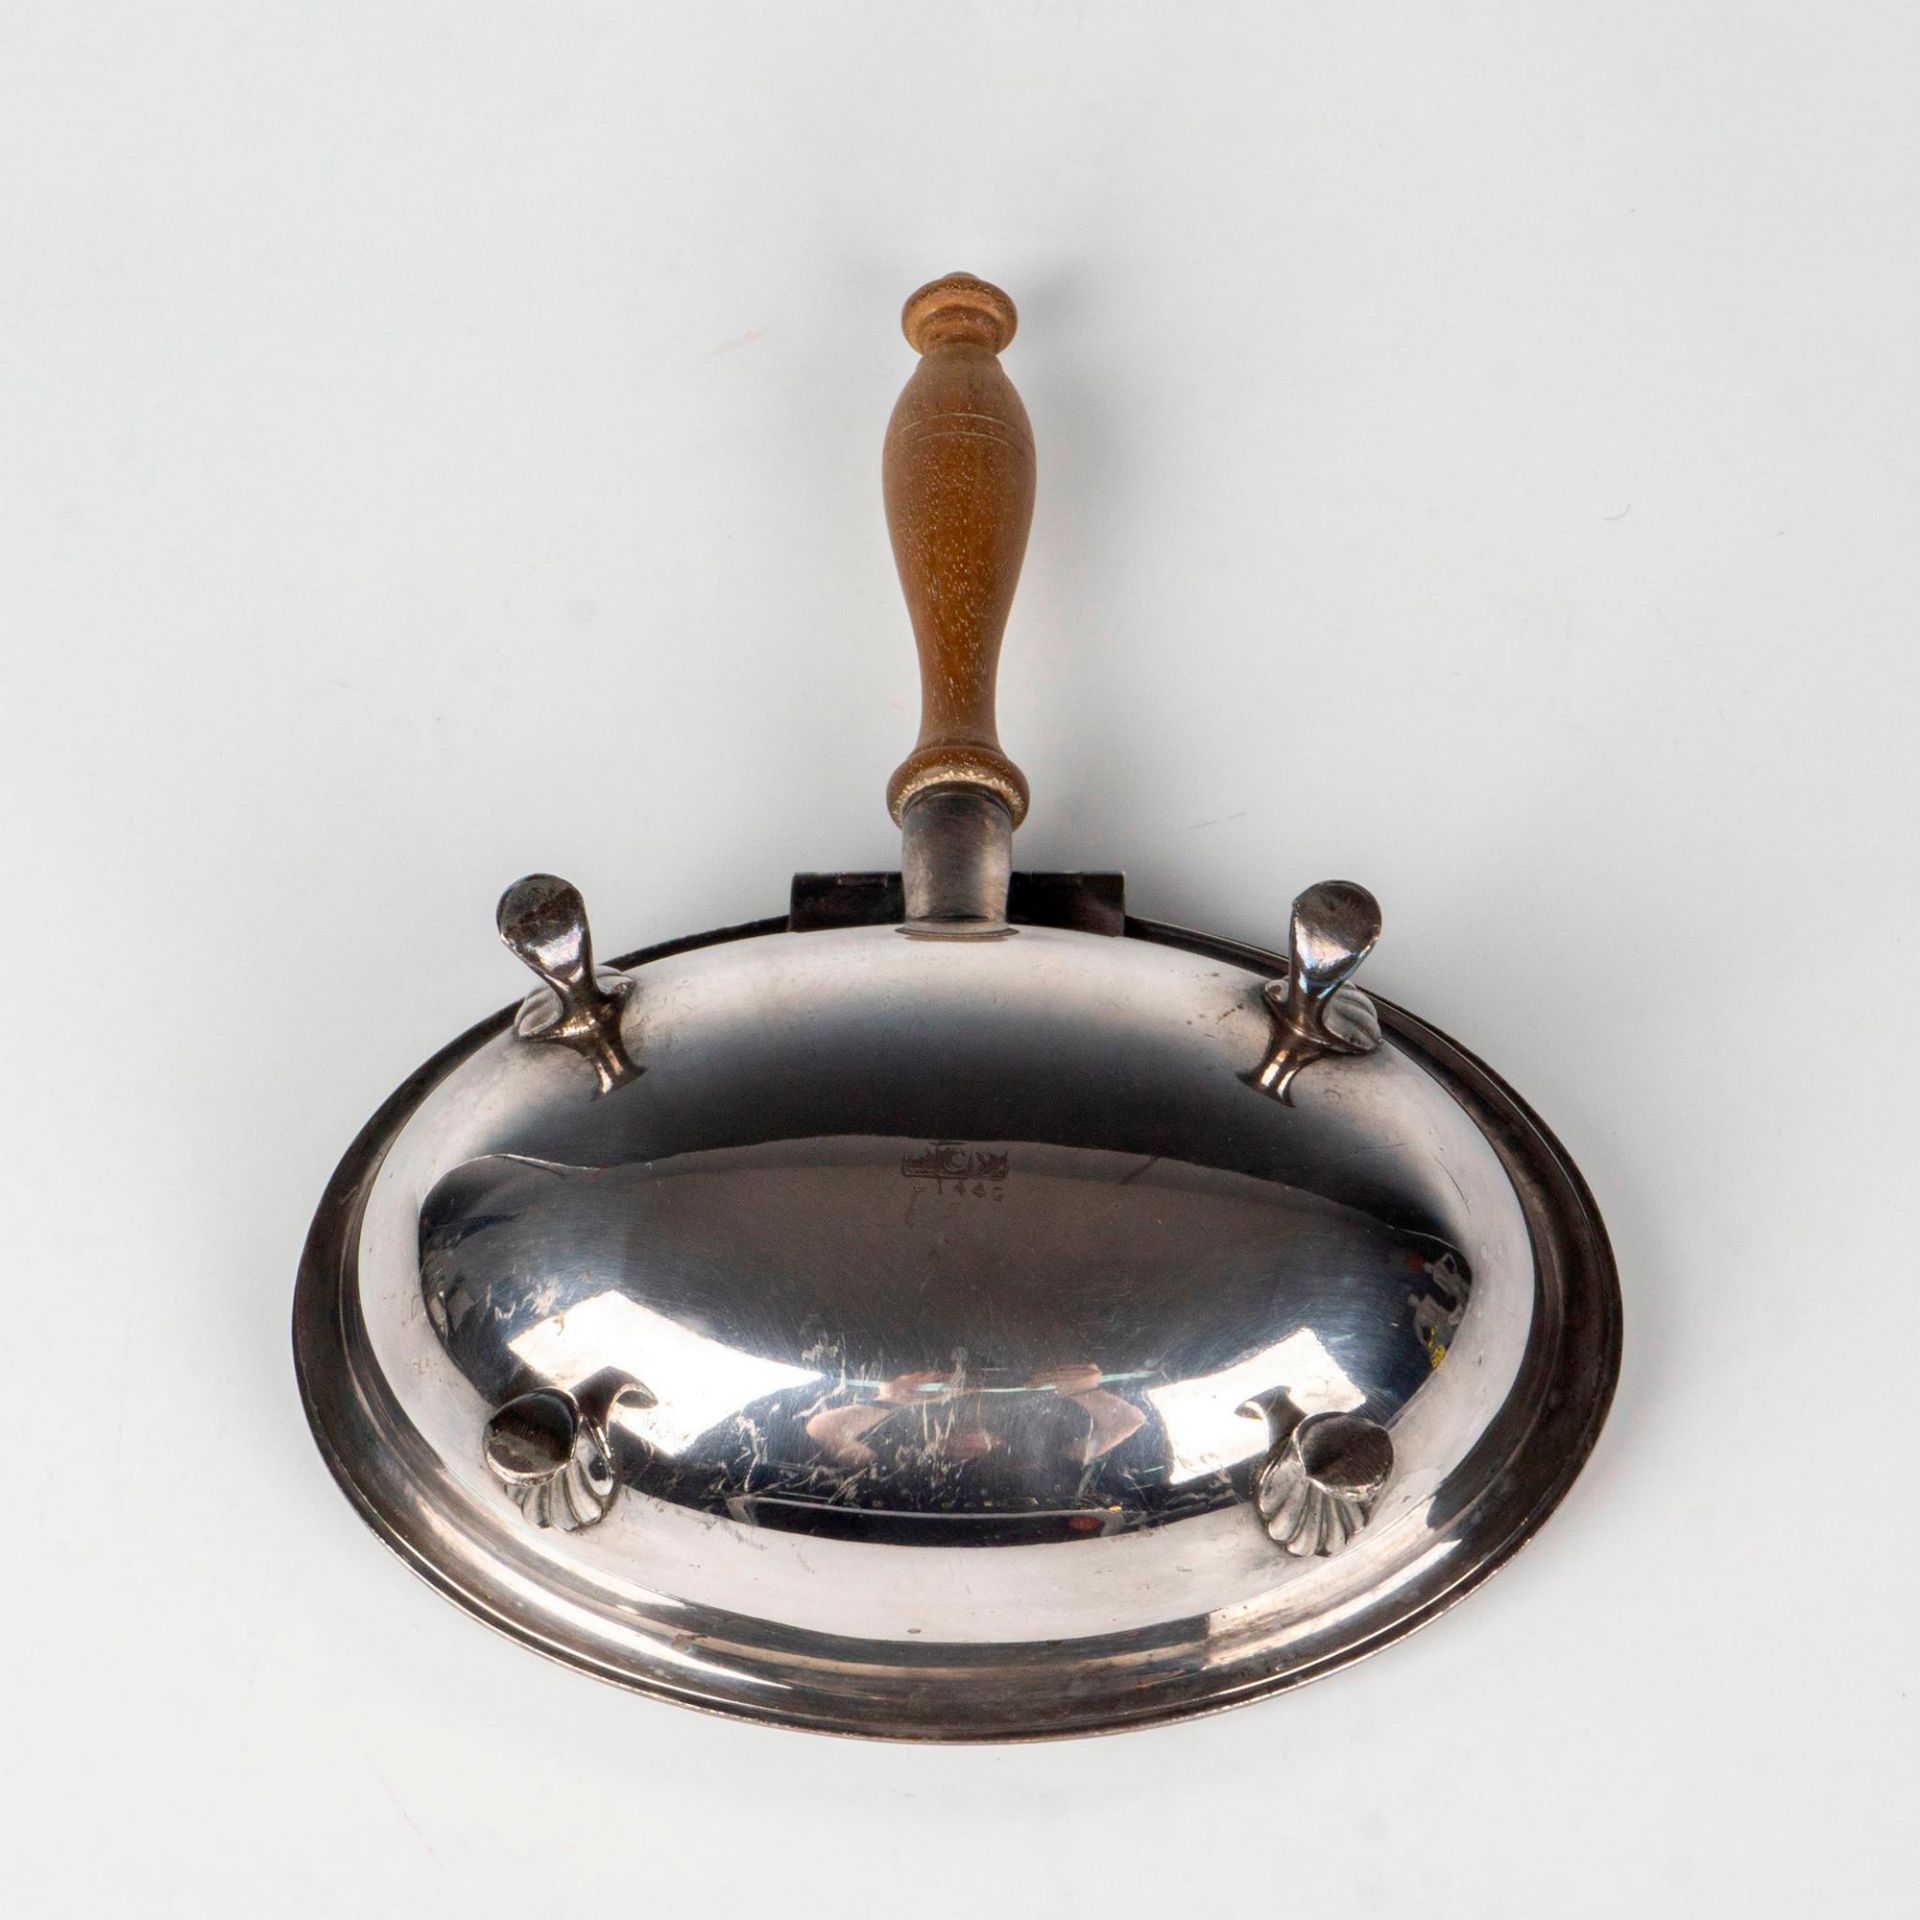 Crescent Silverware Mfg. Co. Silent Butler Serving Dish - Image 3 of 3